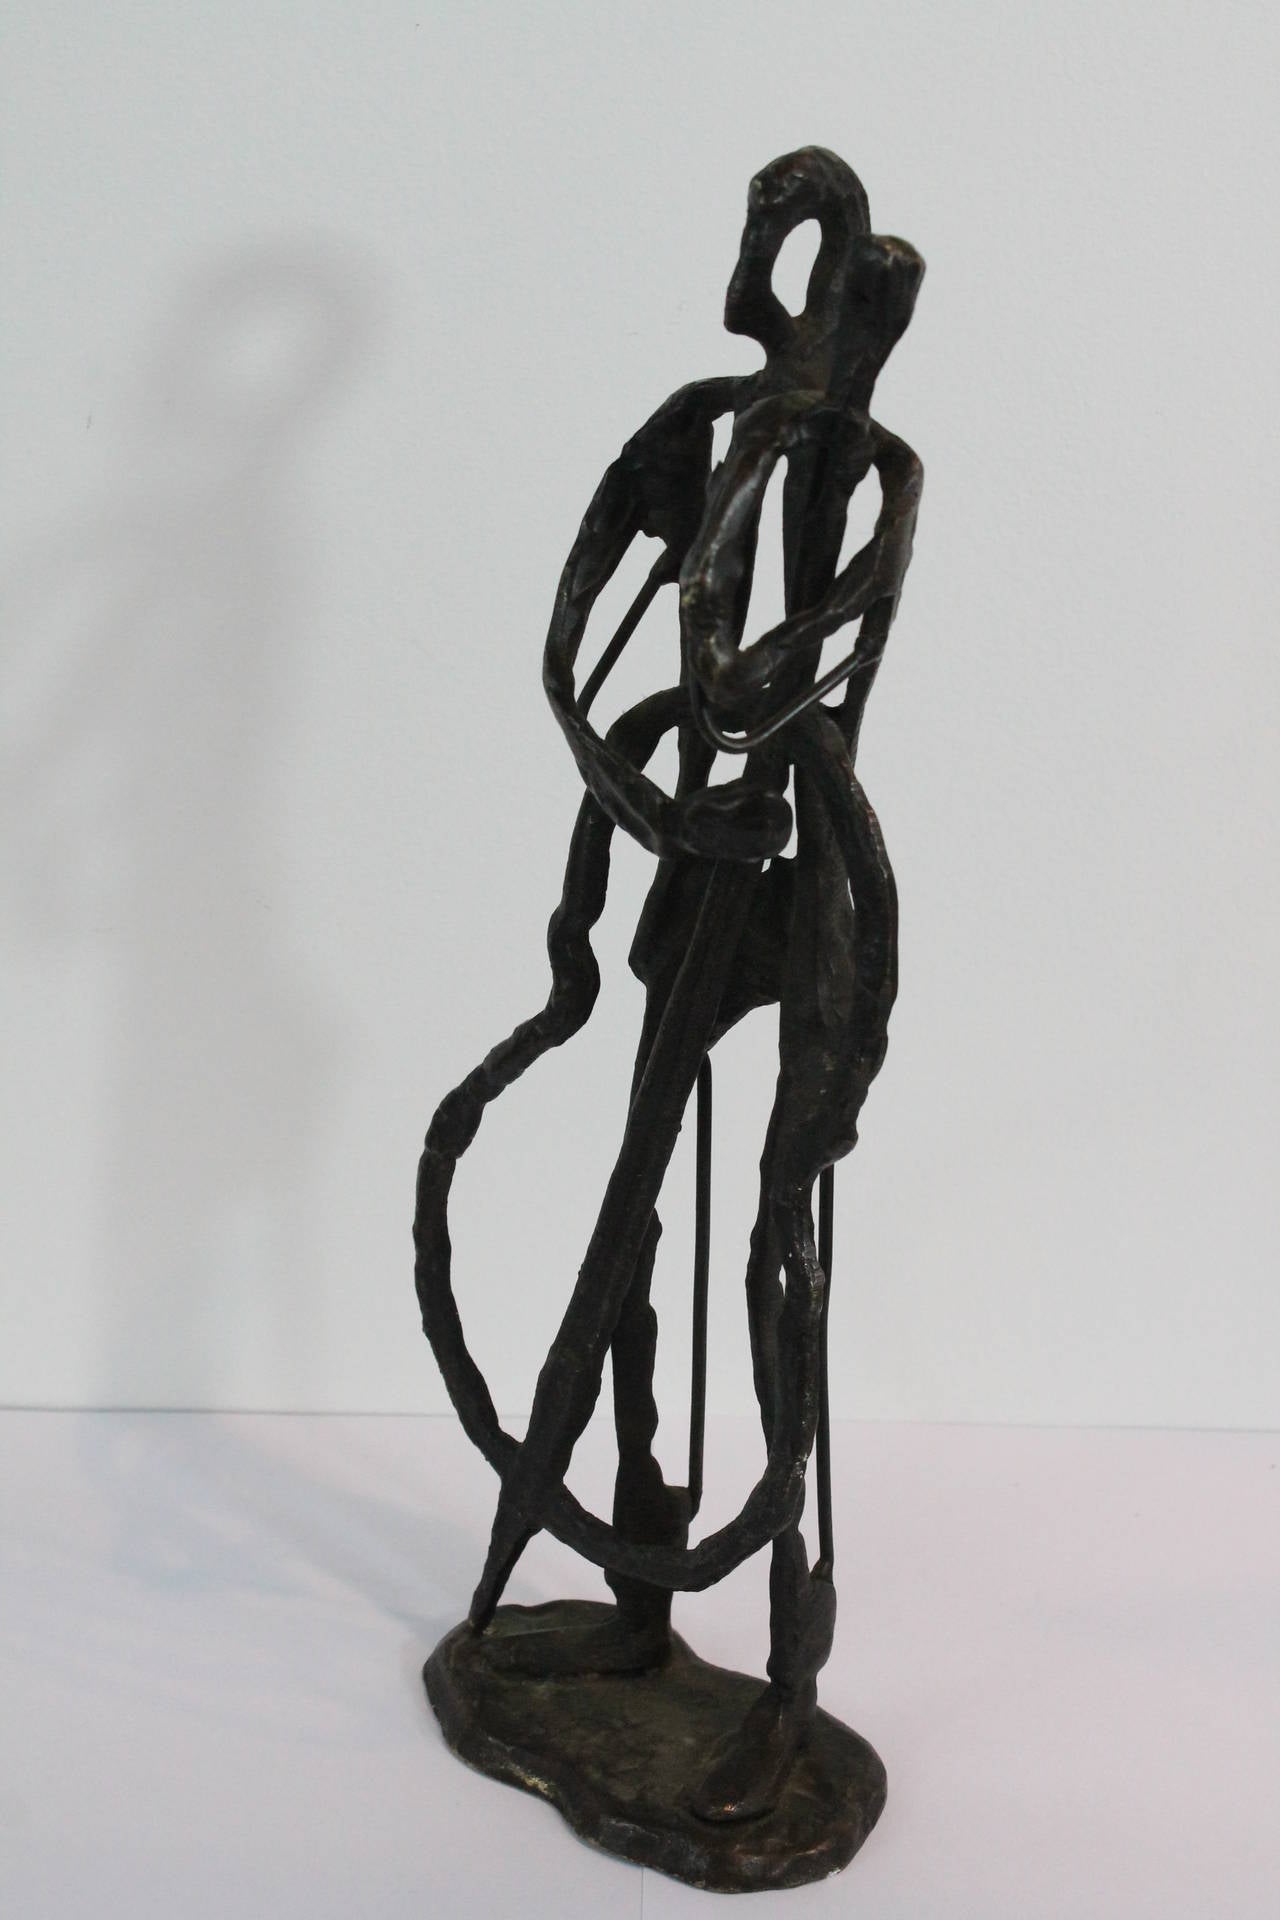 Wonderful evocative Modernist Giacometti-esque bronze sculpture of a bassist.
There are threaded screw taps at the bottom of the sculpture , so the sculpture was originally attached to some sort of base or plinth.